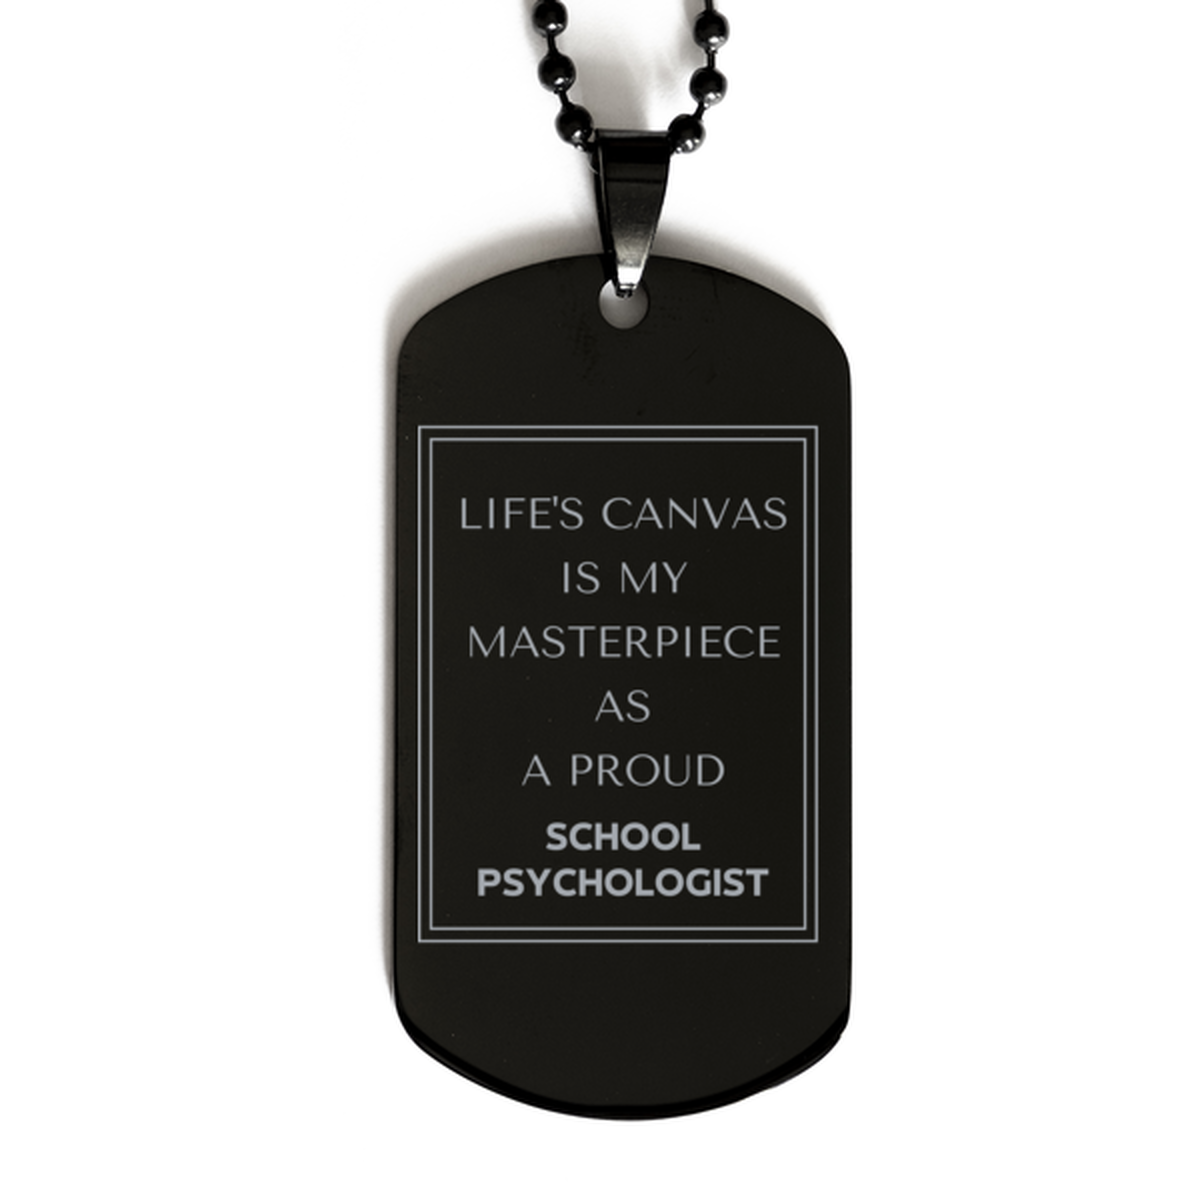 Proud School Psychologist Gifts, Life's canvas is my masterpiece, Epic Birthday Christmas Unique Black Dog Tag For School Psychologist, Coworkers, Men, Women, Friends